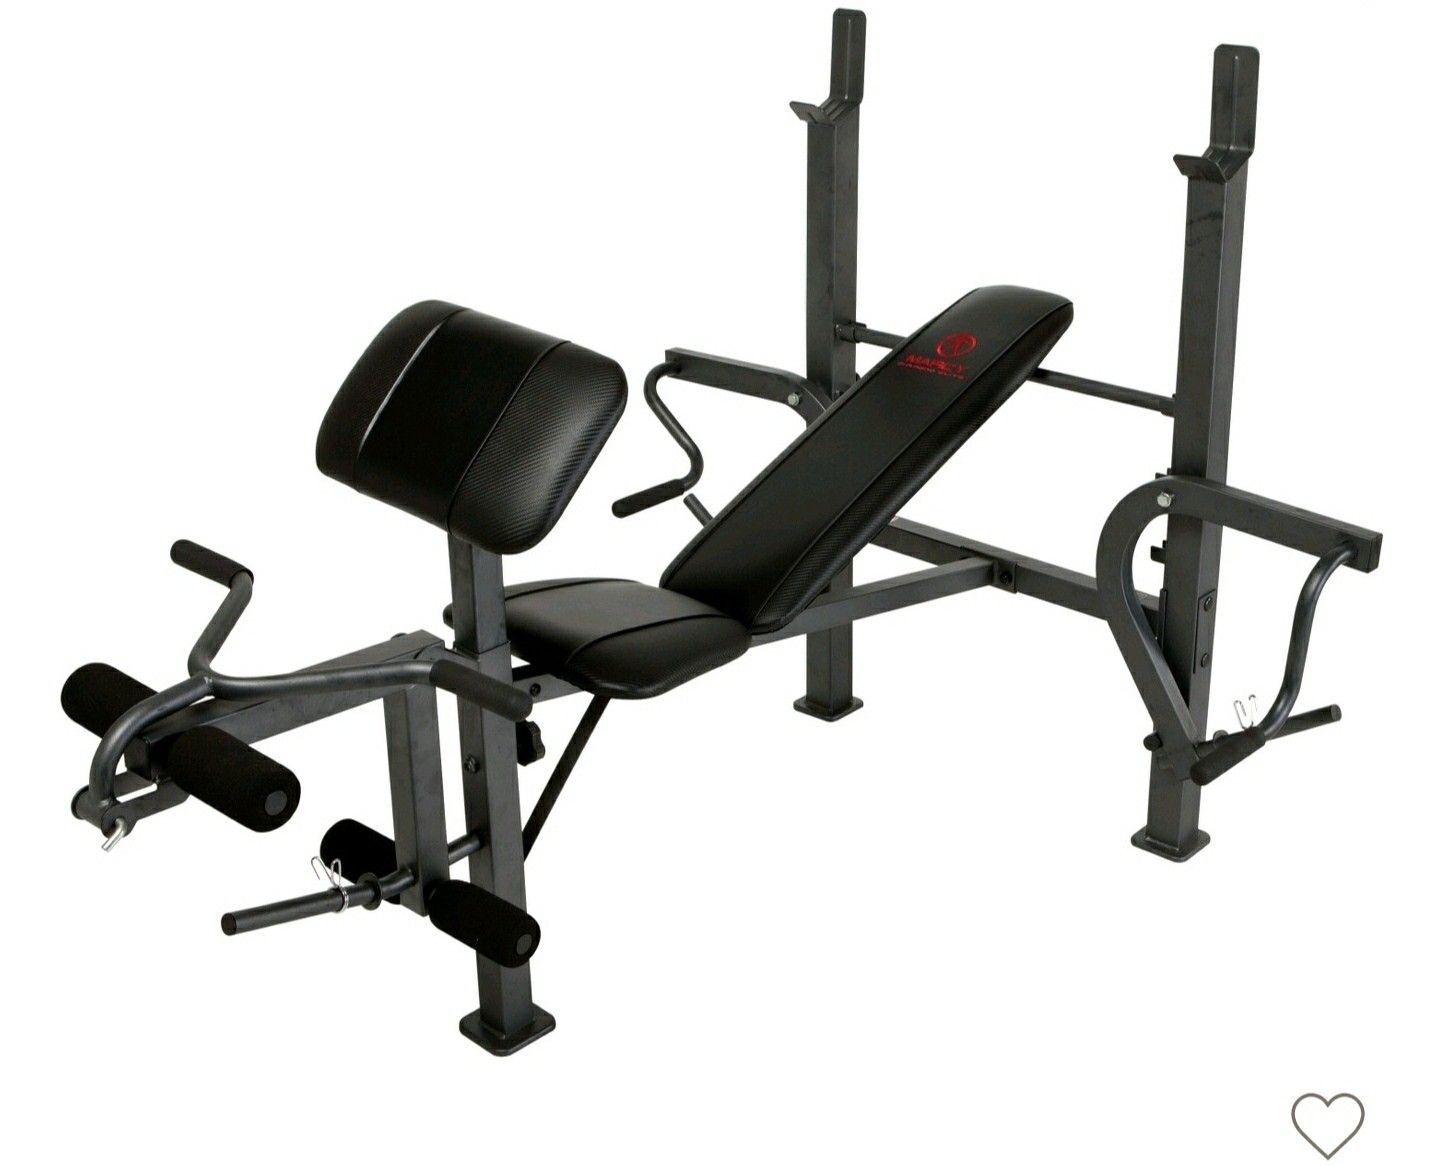 Marcy weight bench